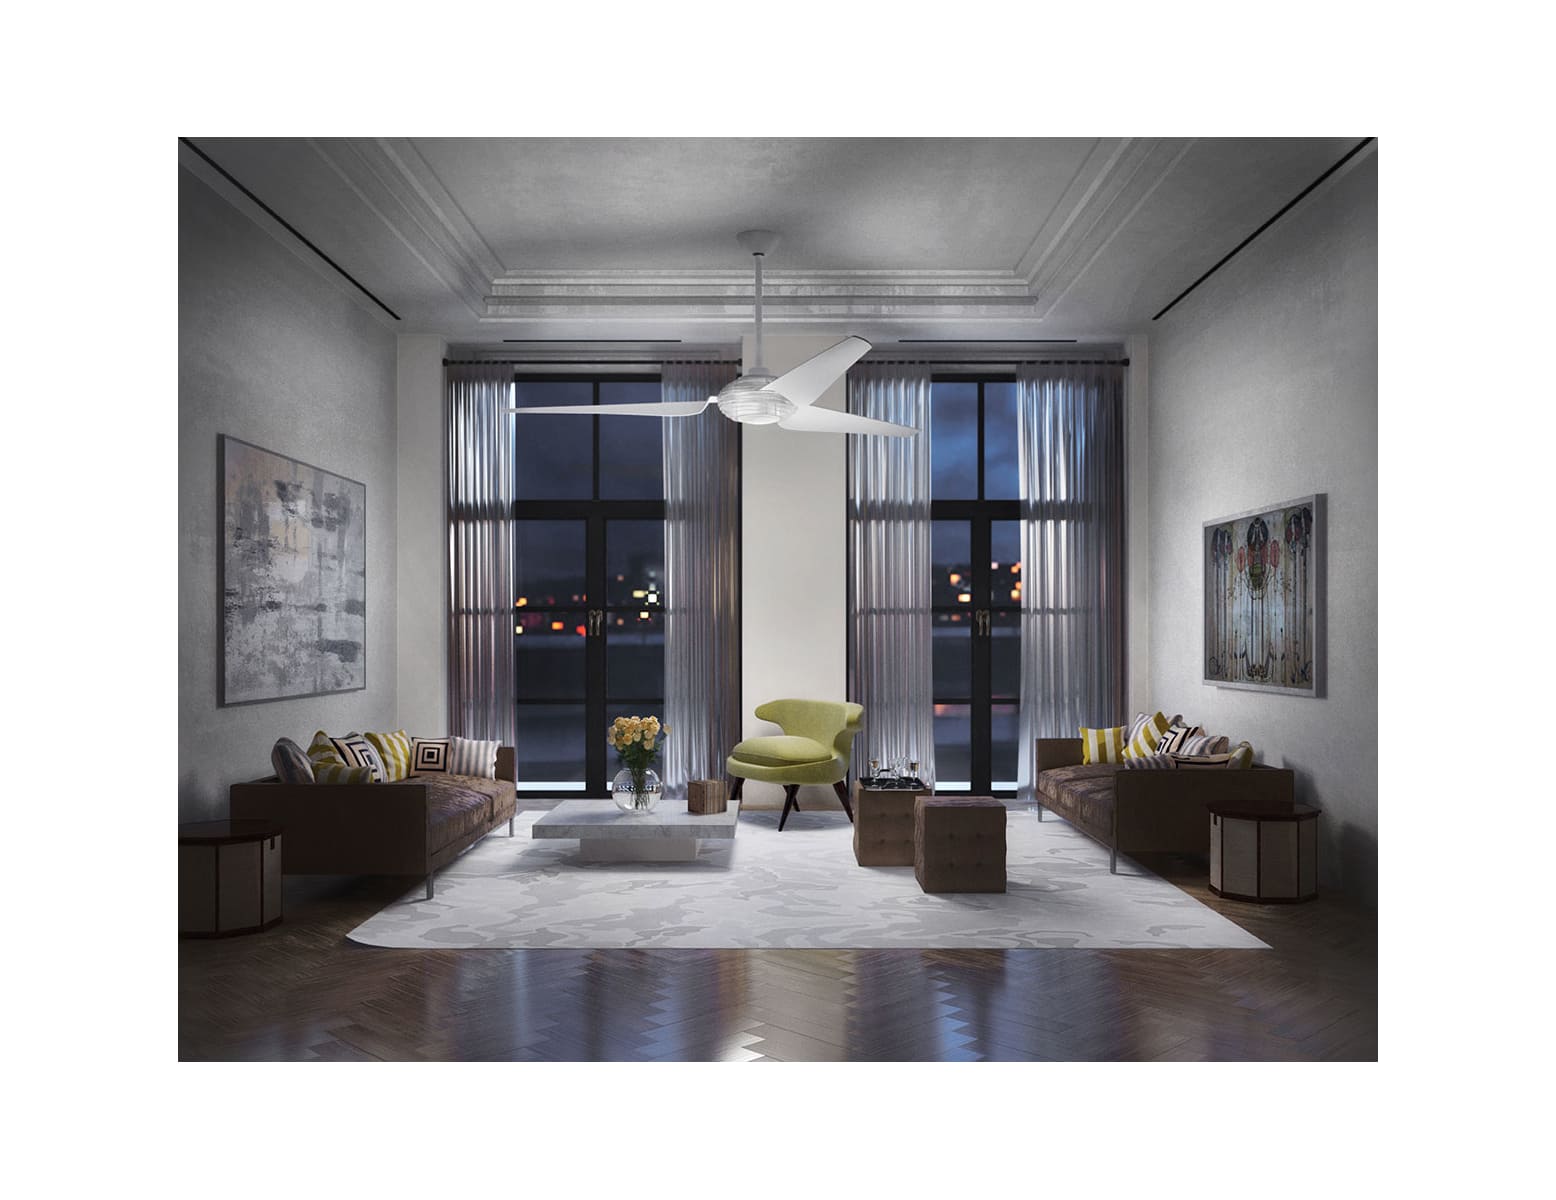 White Kichler Voya 84" Ceiling Fan with LED Light and Wall Control 